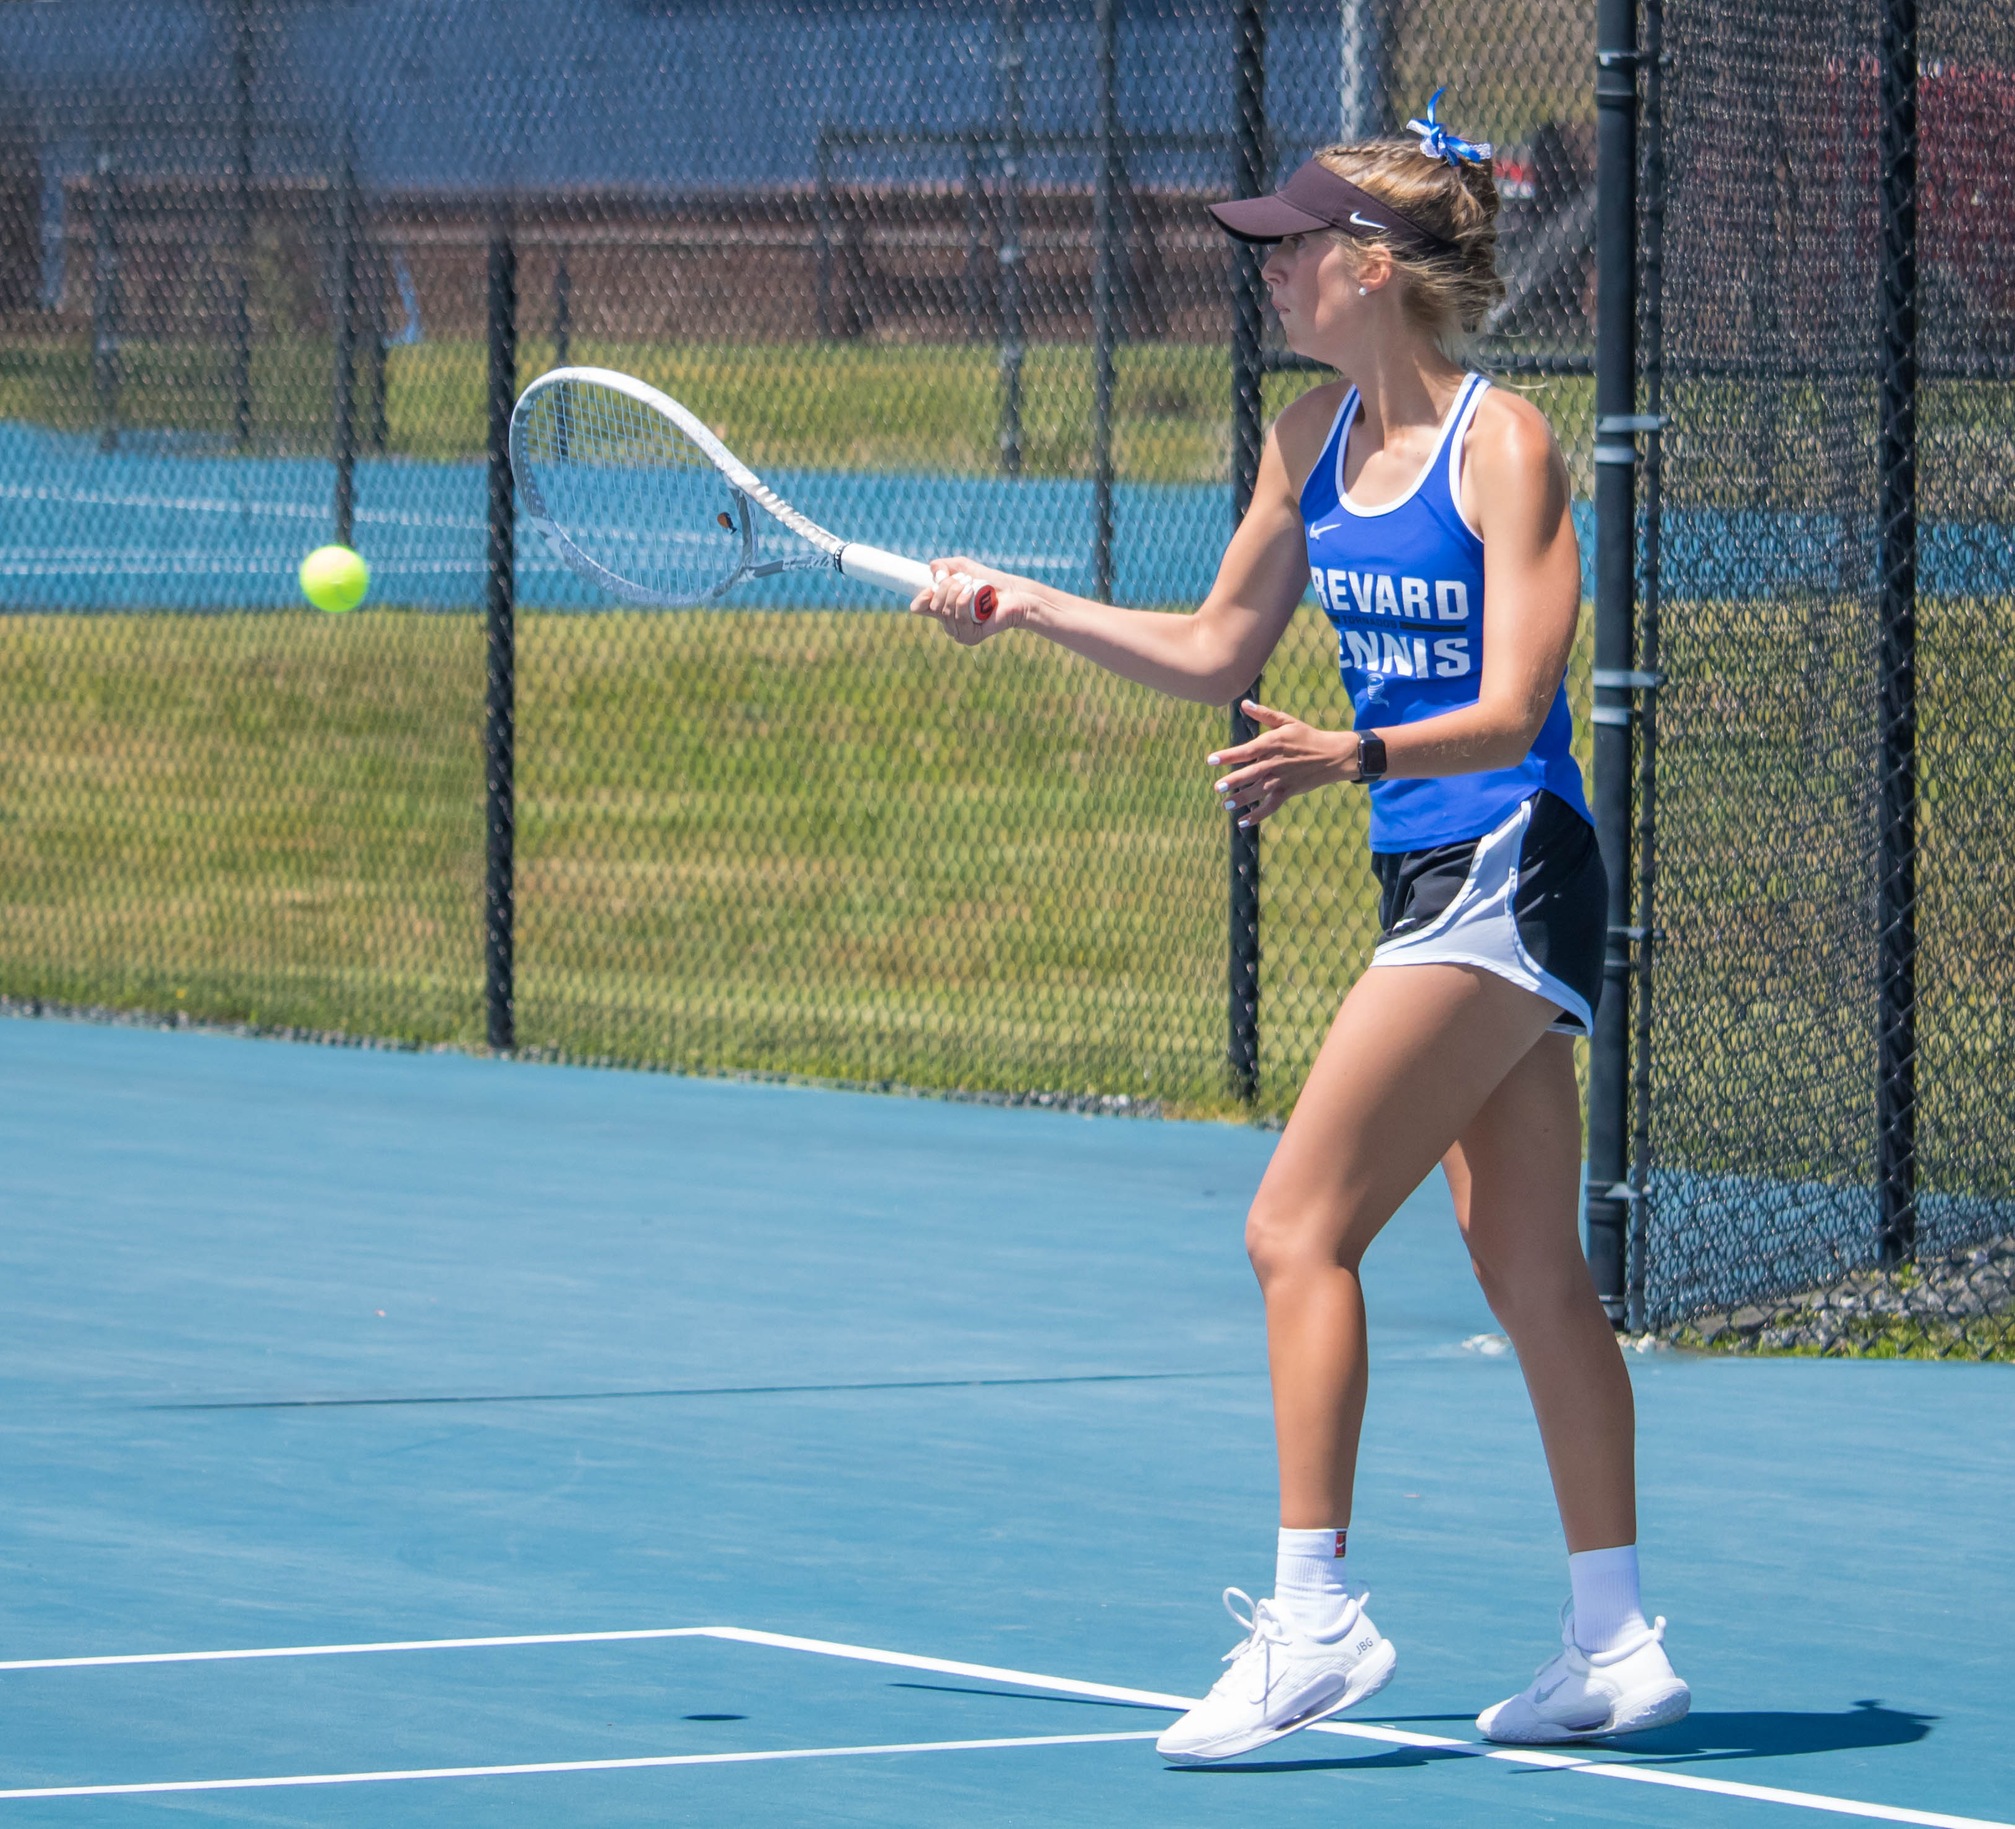 Brevard Handles Maryville to Advance to Quarterfinals of USA South Tournament